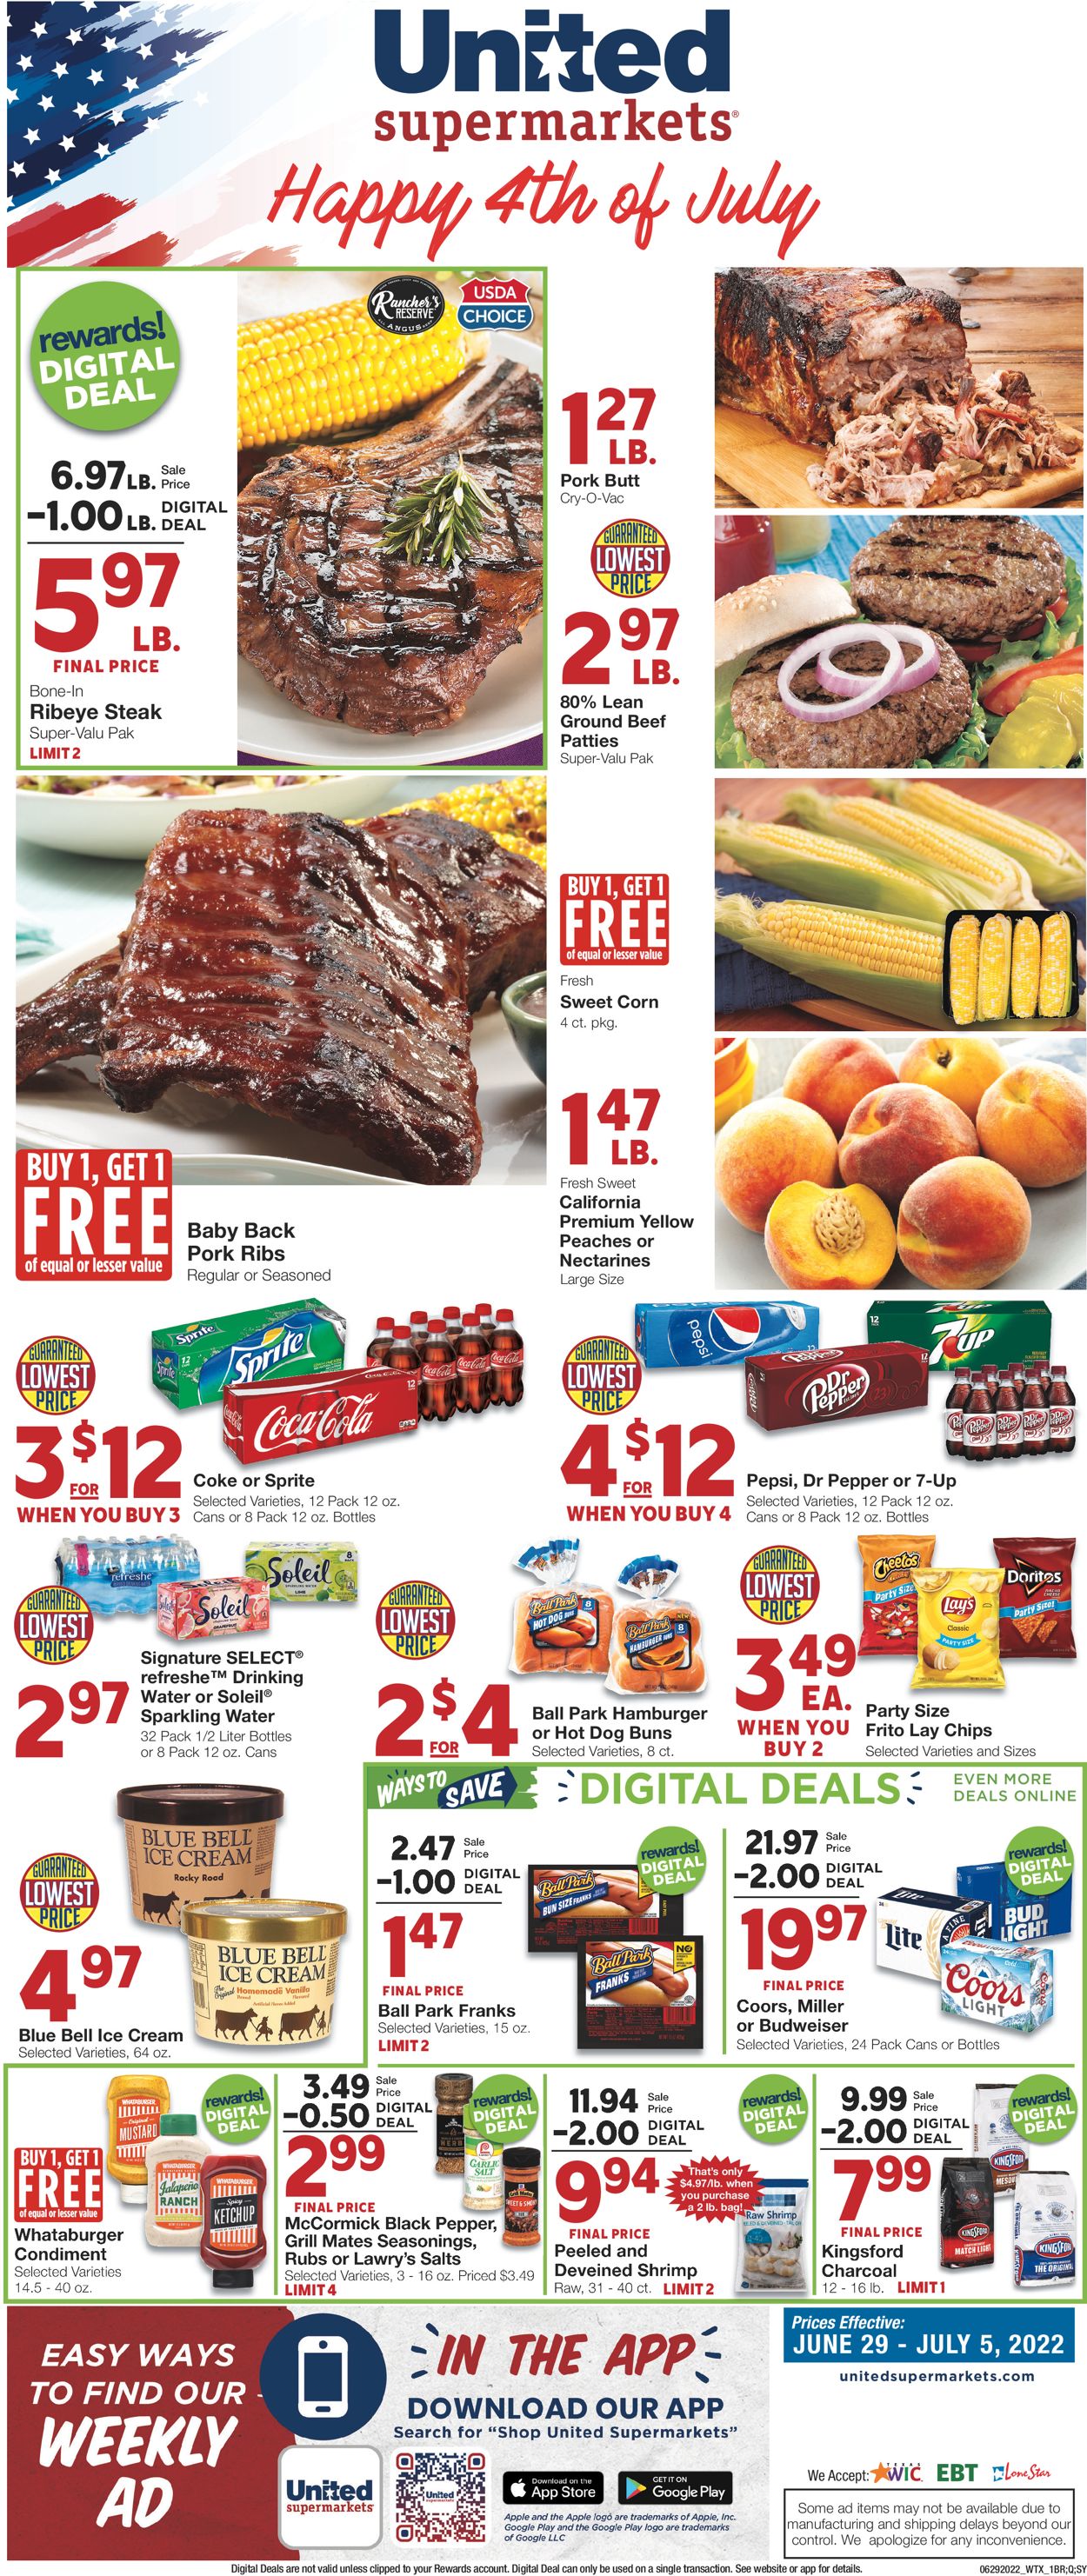 United Supermarkets - 4th of July Sale Weekly Ad Circular - valid 06/29-07/05/2022